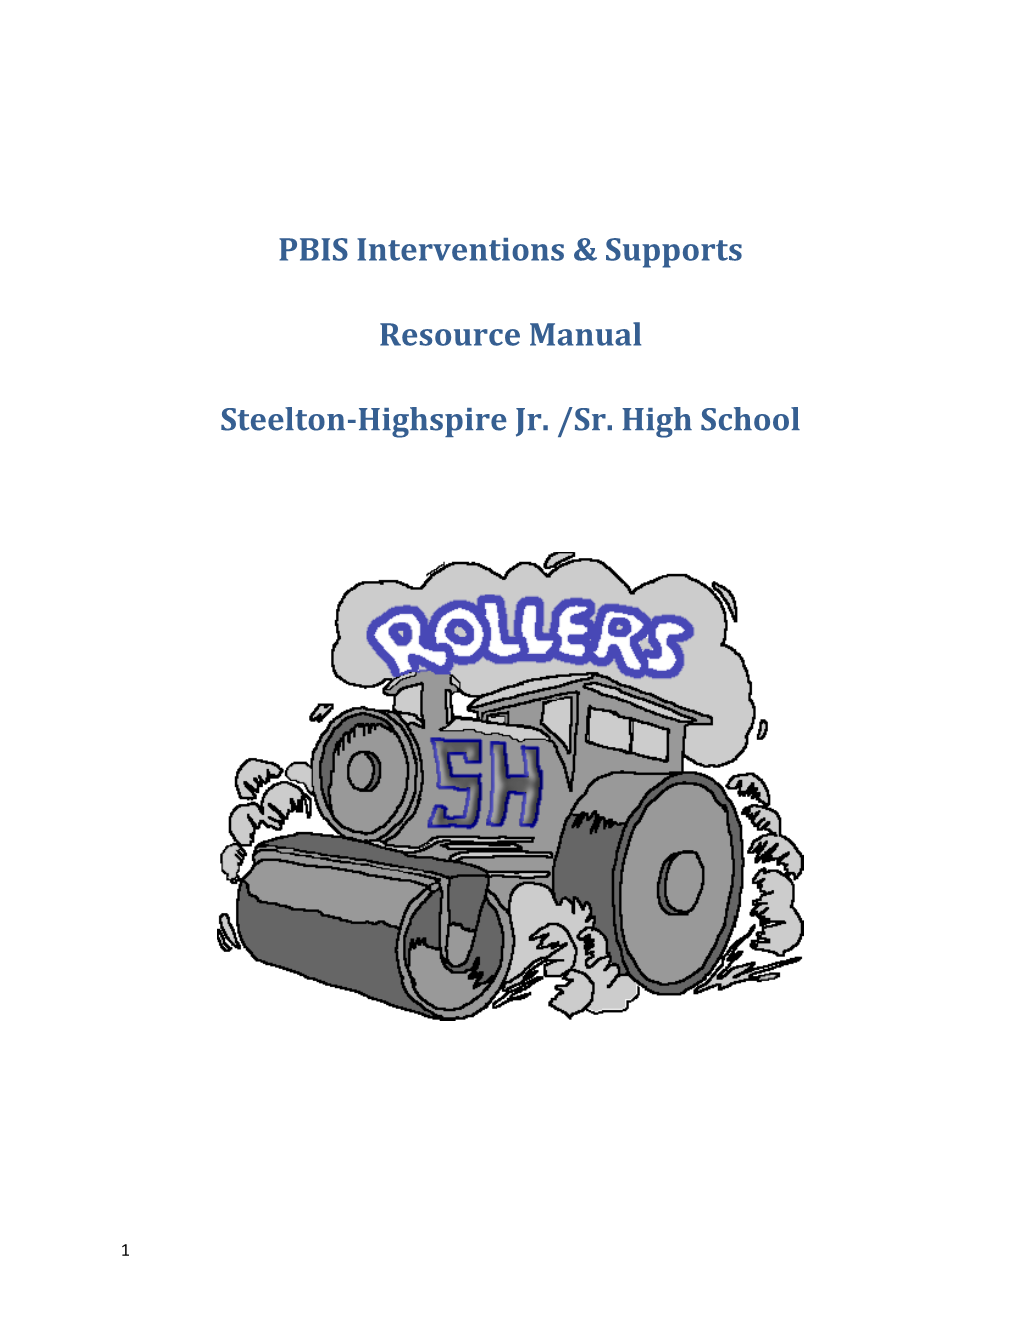 PBIS Interventions & Supports